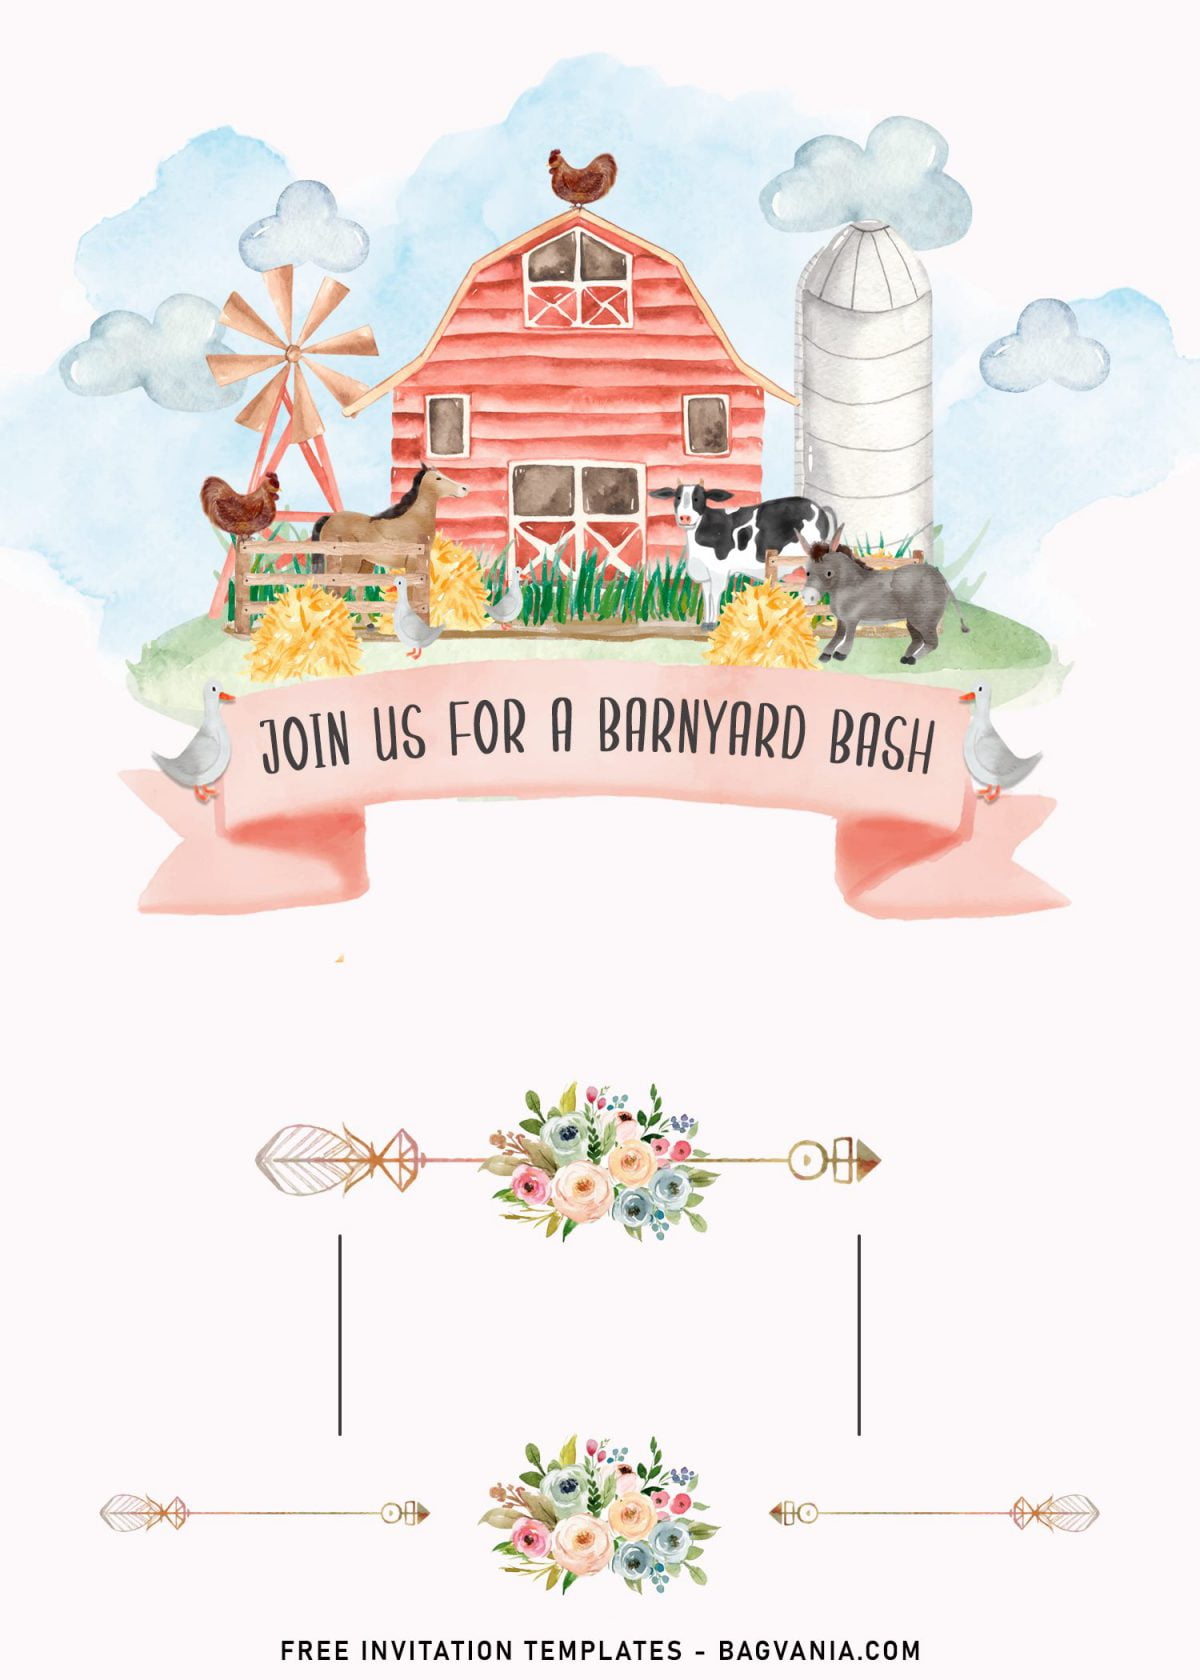 11+ Whimsical Farm Birthday Party Invitation Templates and has watercolor painting of kettle